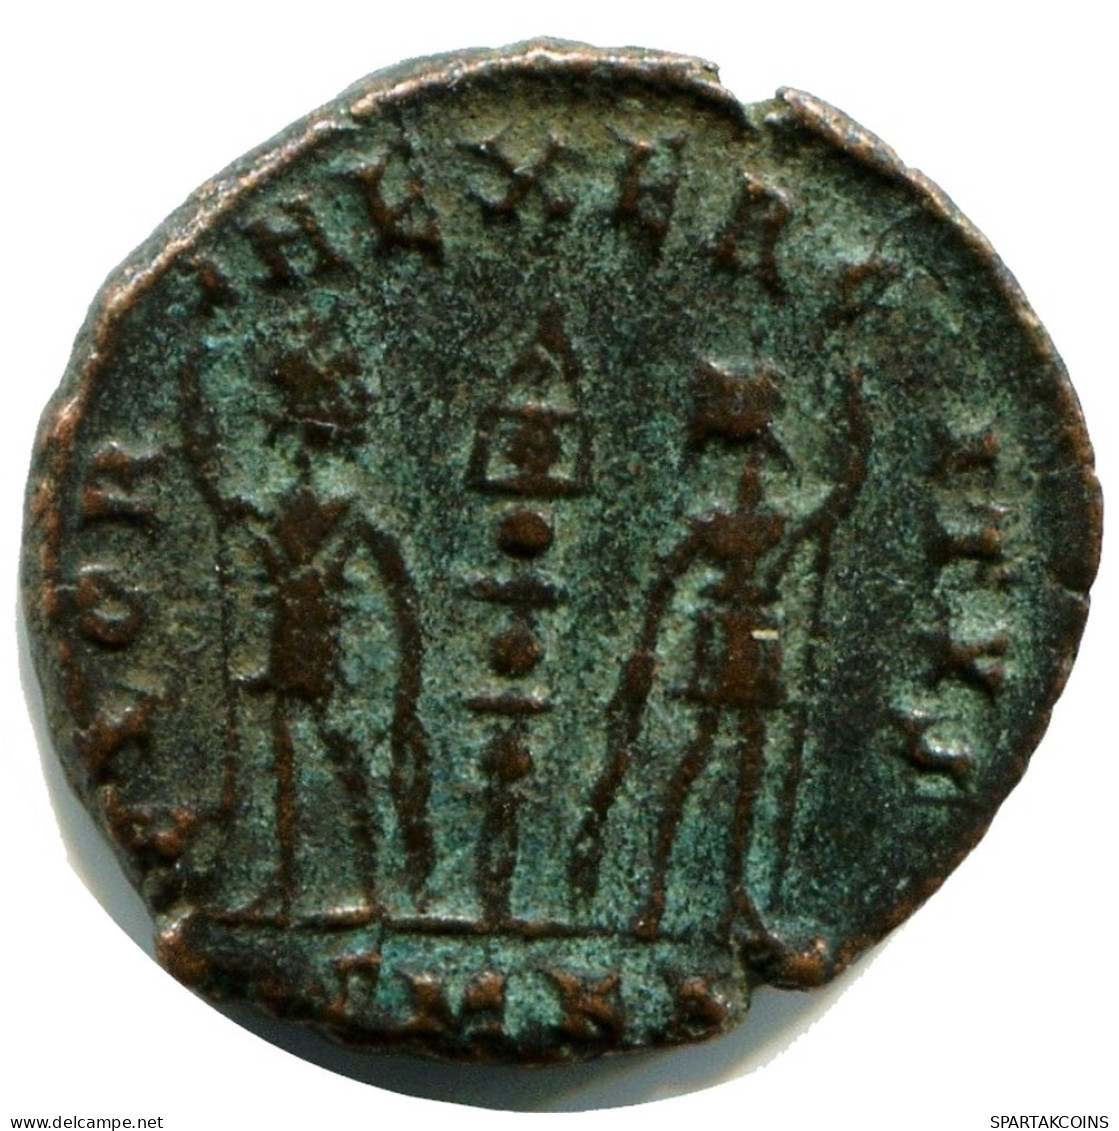 CONSTANS MINTED IN CYZICUS FROM THE ROYAL ONTARIO MUSEUM #ANC11635.14.E.A - The Christian Empire (307 AD Tot 363 AD)